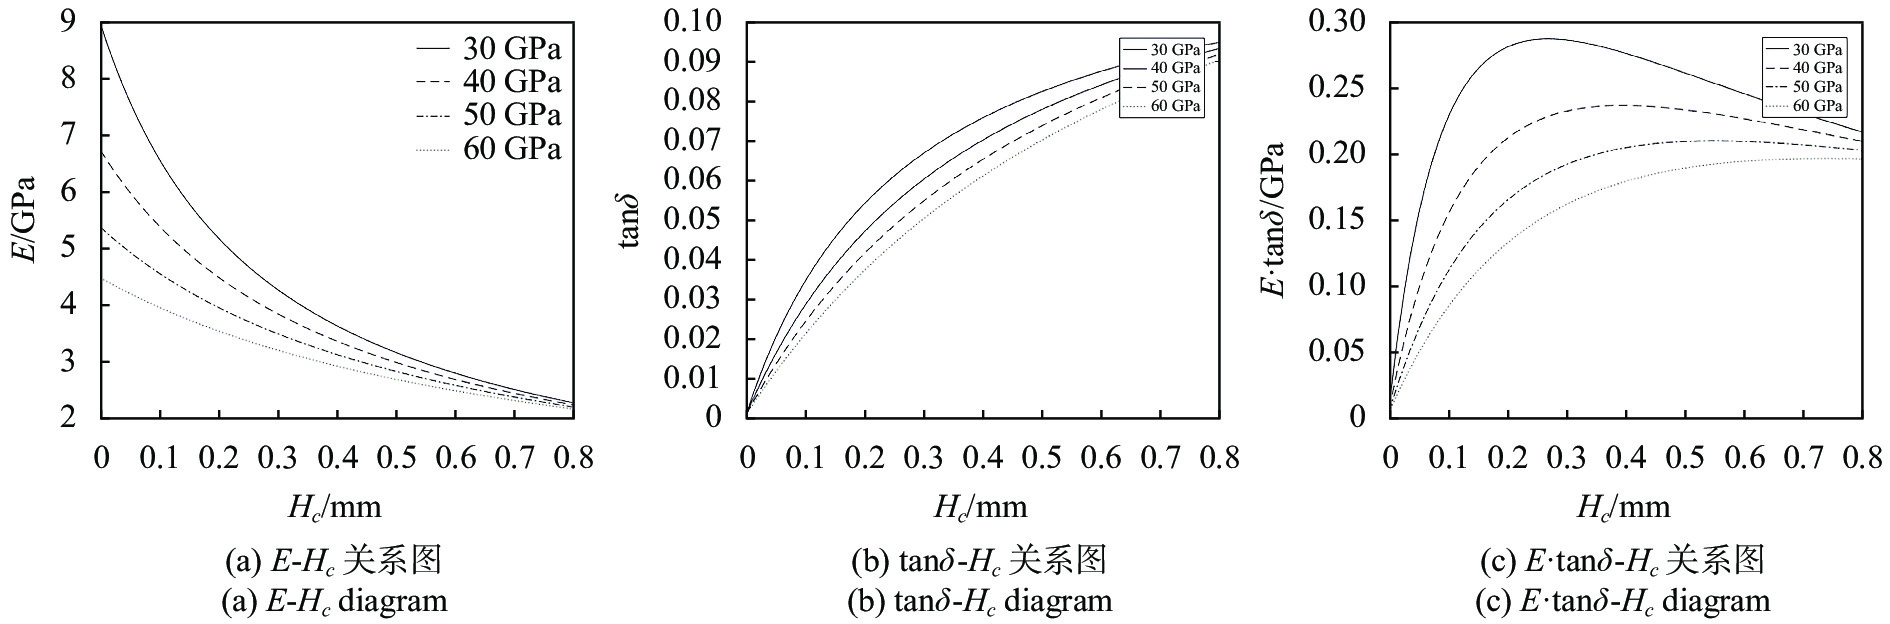 Relationship between properties of composite structure and coating thickness